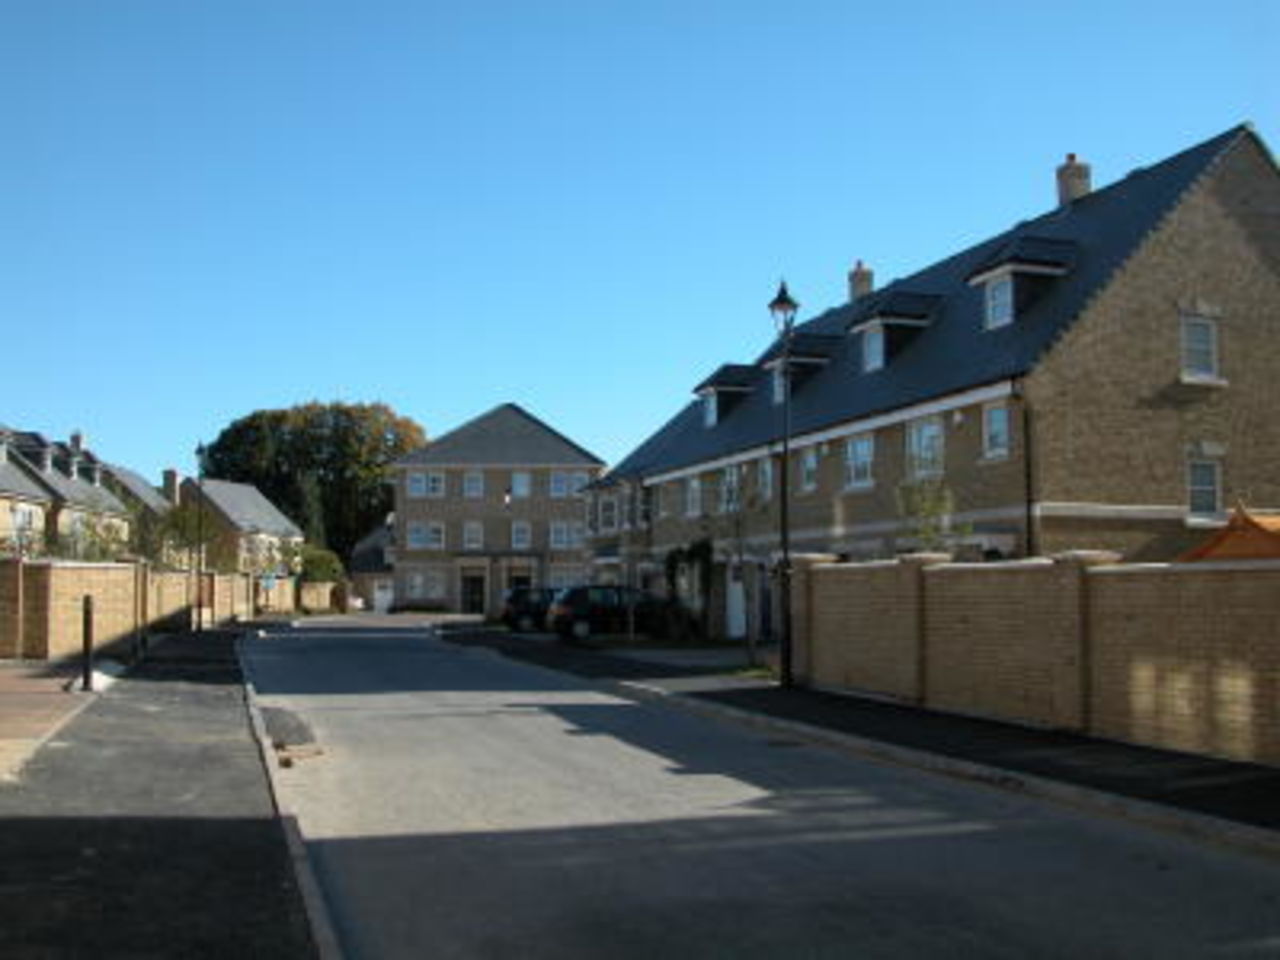 Another scene of the Pavilions Housing estate